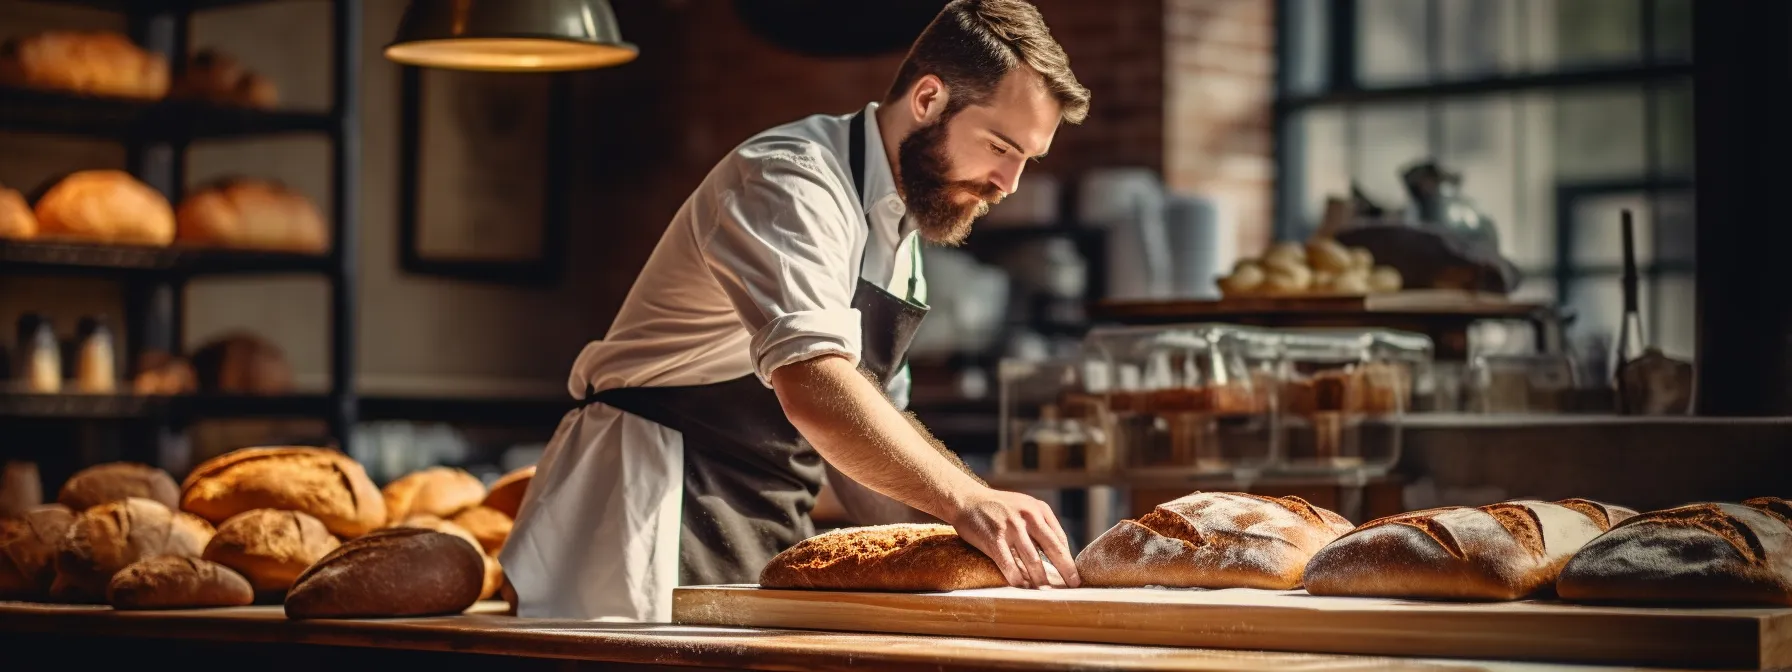 a local artisan bakery improves online visibility and sales through learned seo strategies, including optimized keyword research.